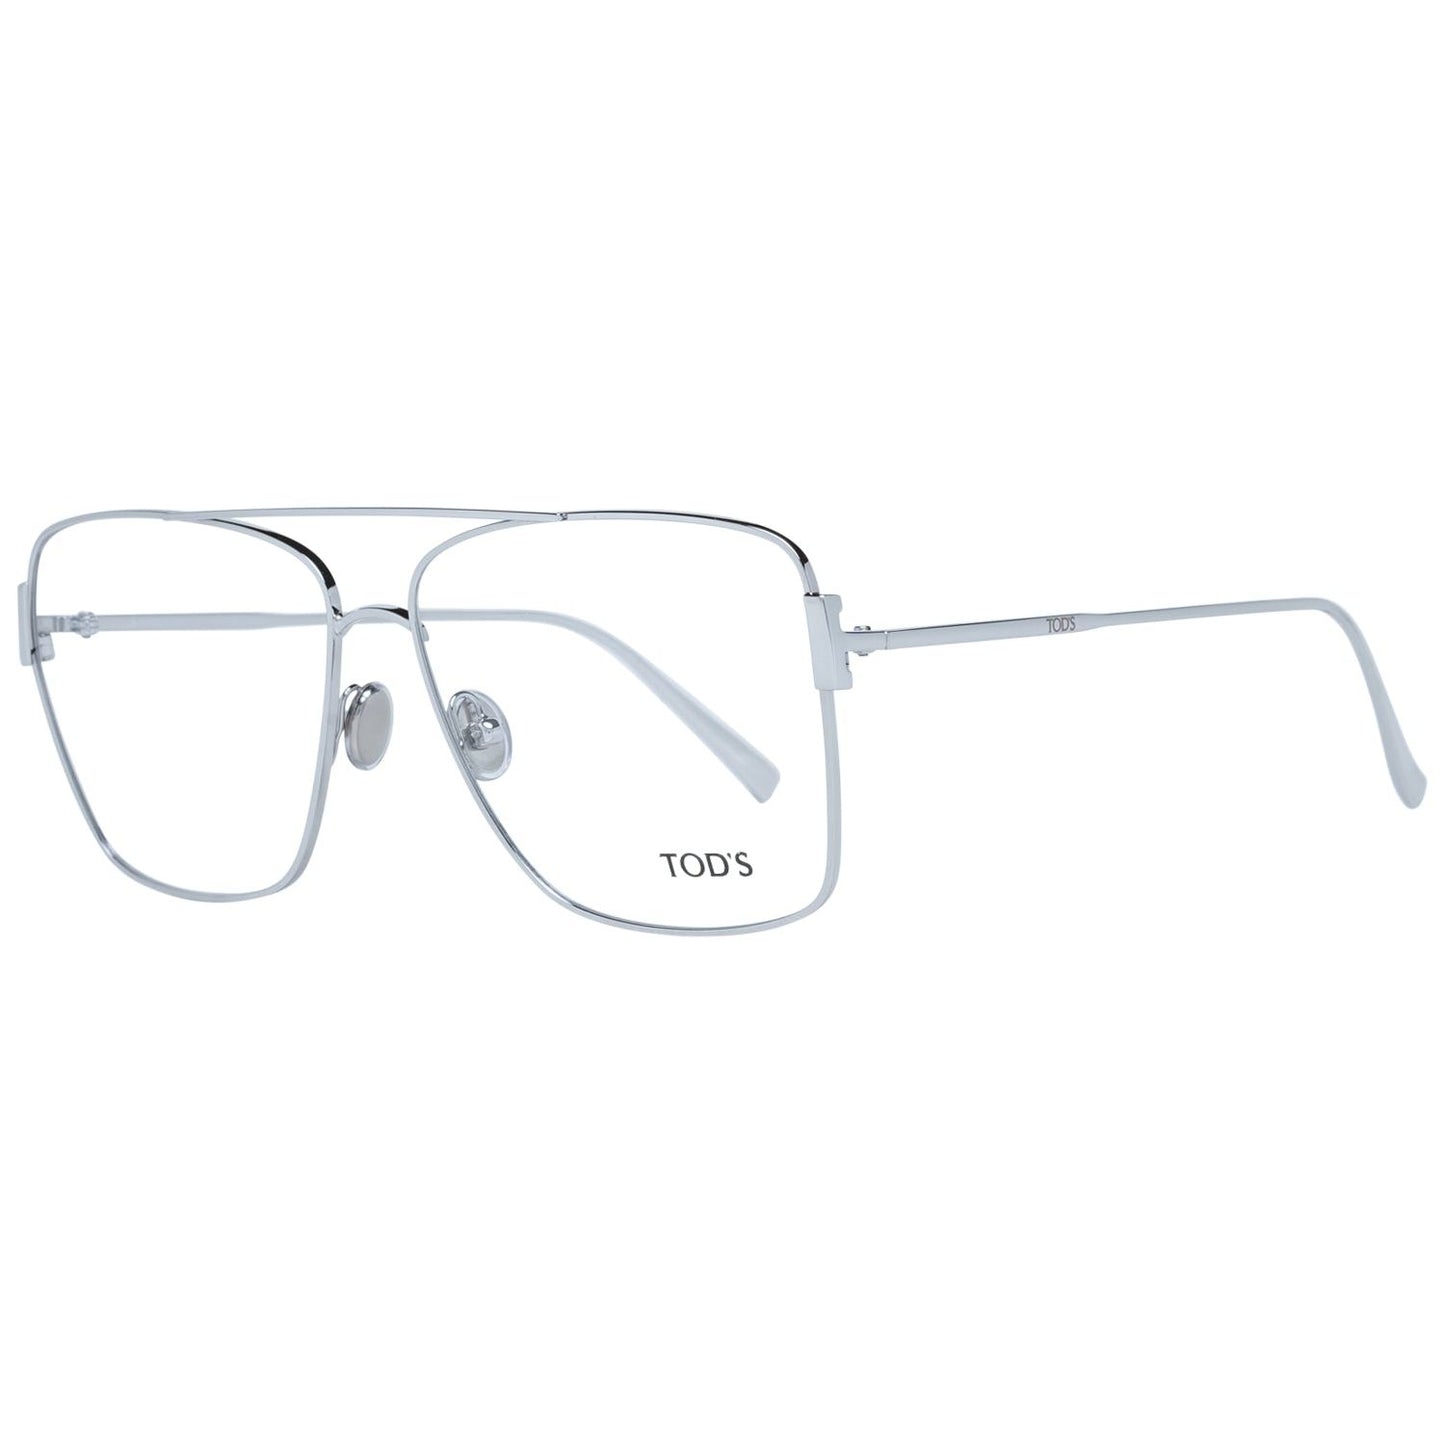 TODS FRAME TODS MOD. TO5281 56018 SUNGLASSES & EYEWEAR tods-mod-to5281-56018